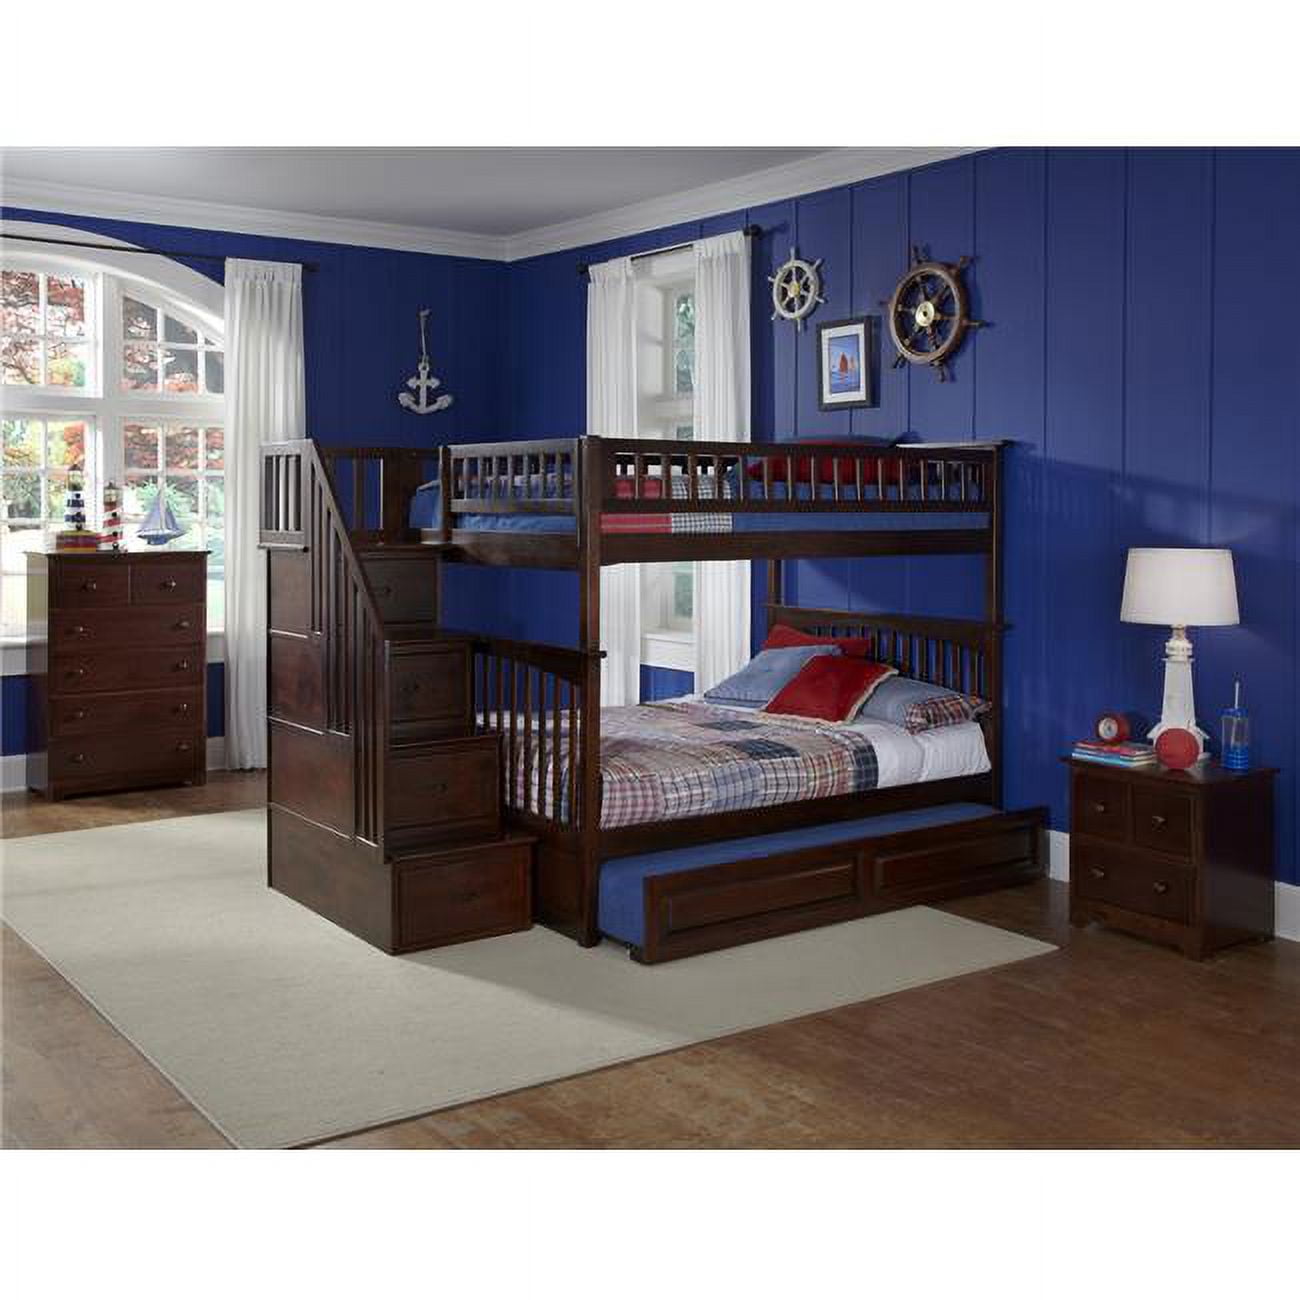 AB55854 Columbia Staircase Bunkbed with Urban Trundle Bed - Antique Walnut, Full Over Full Size -  Atlantic Furniture